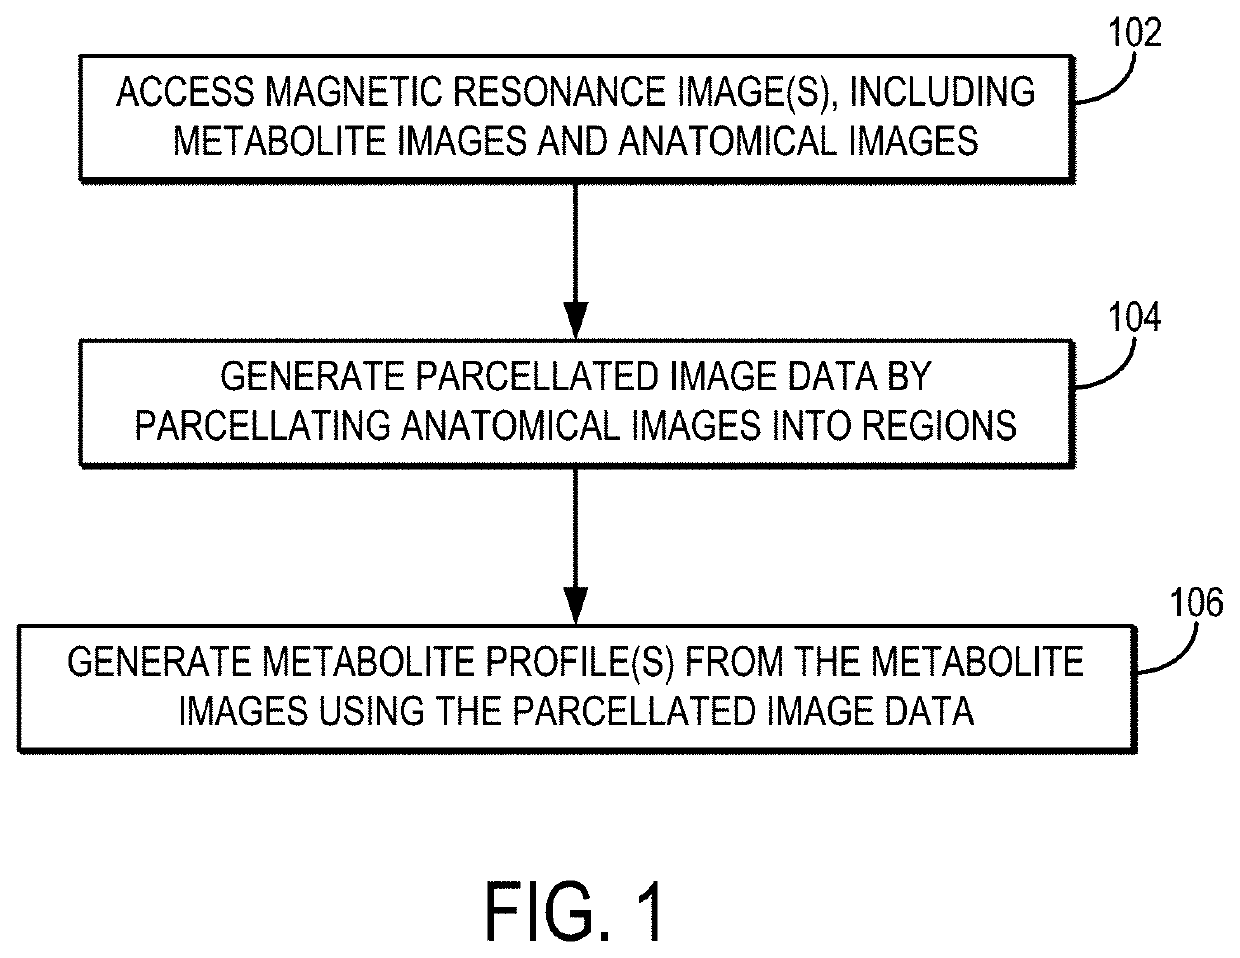 Systems and methods for metabolite topography of the brain with magnetic resonance imaging